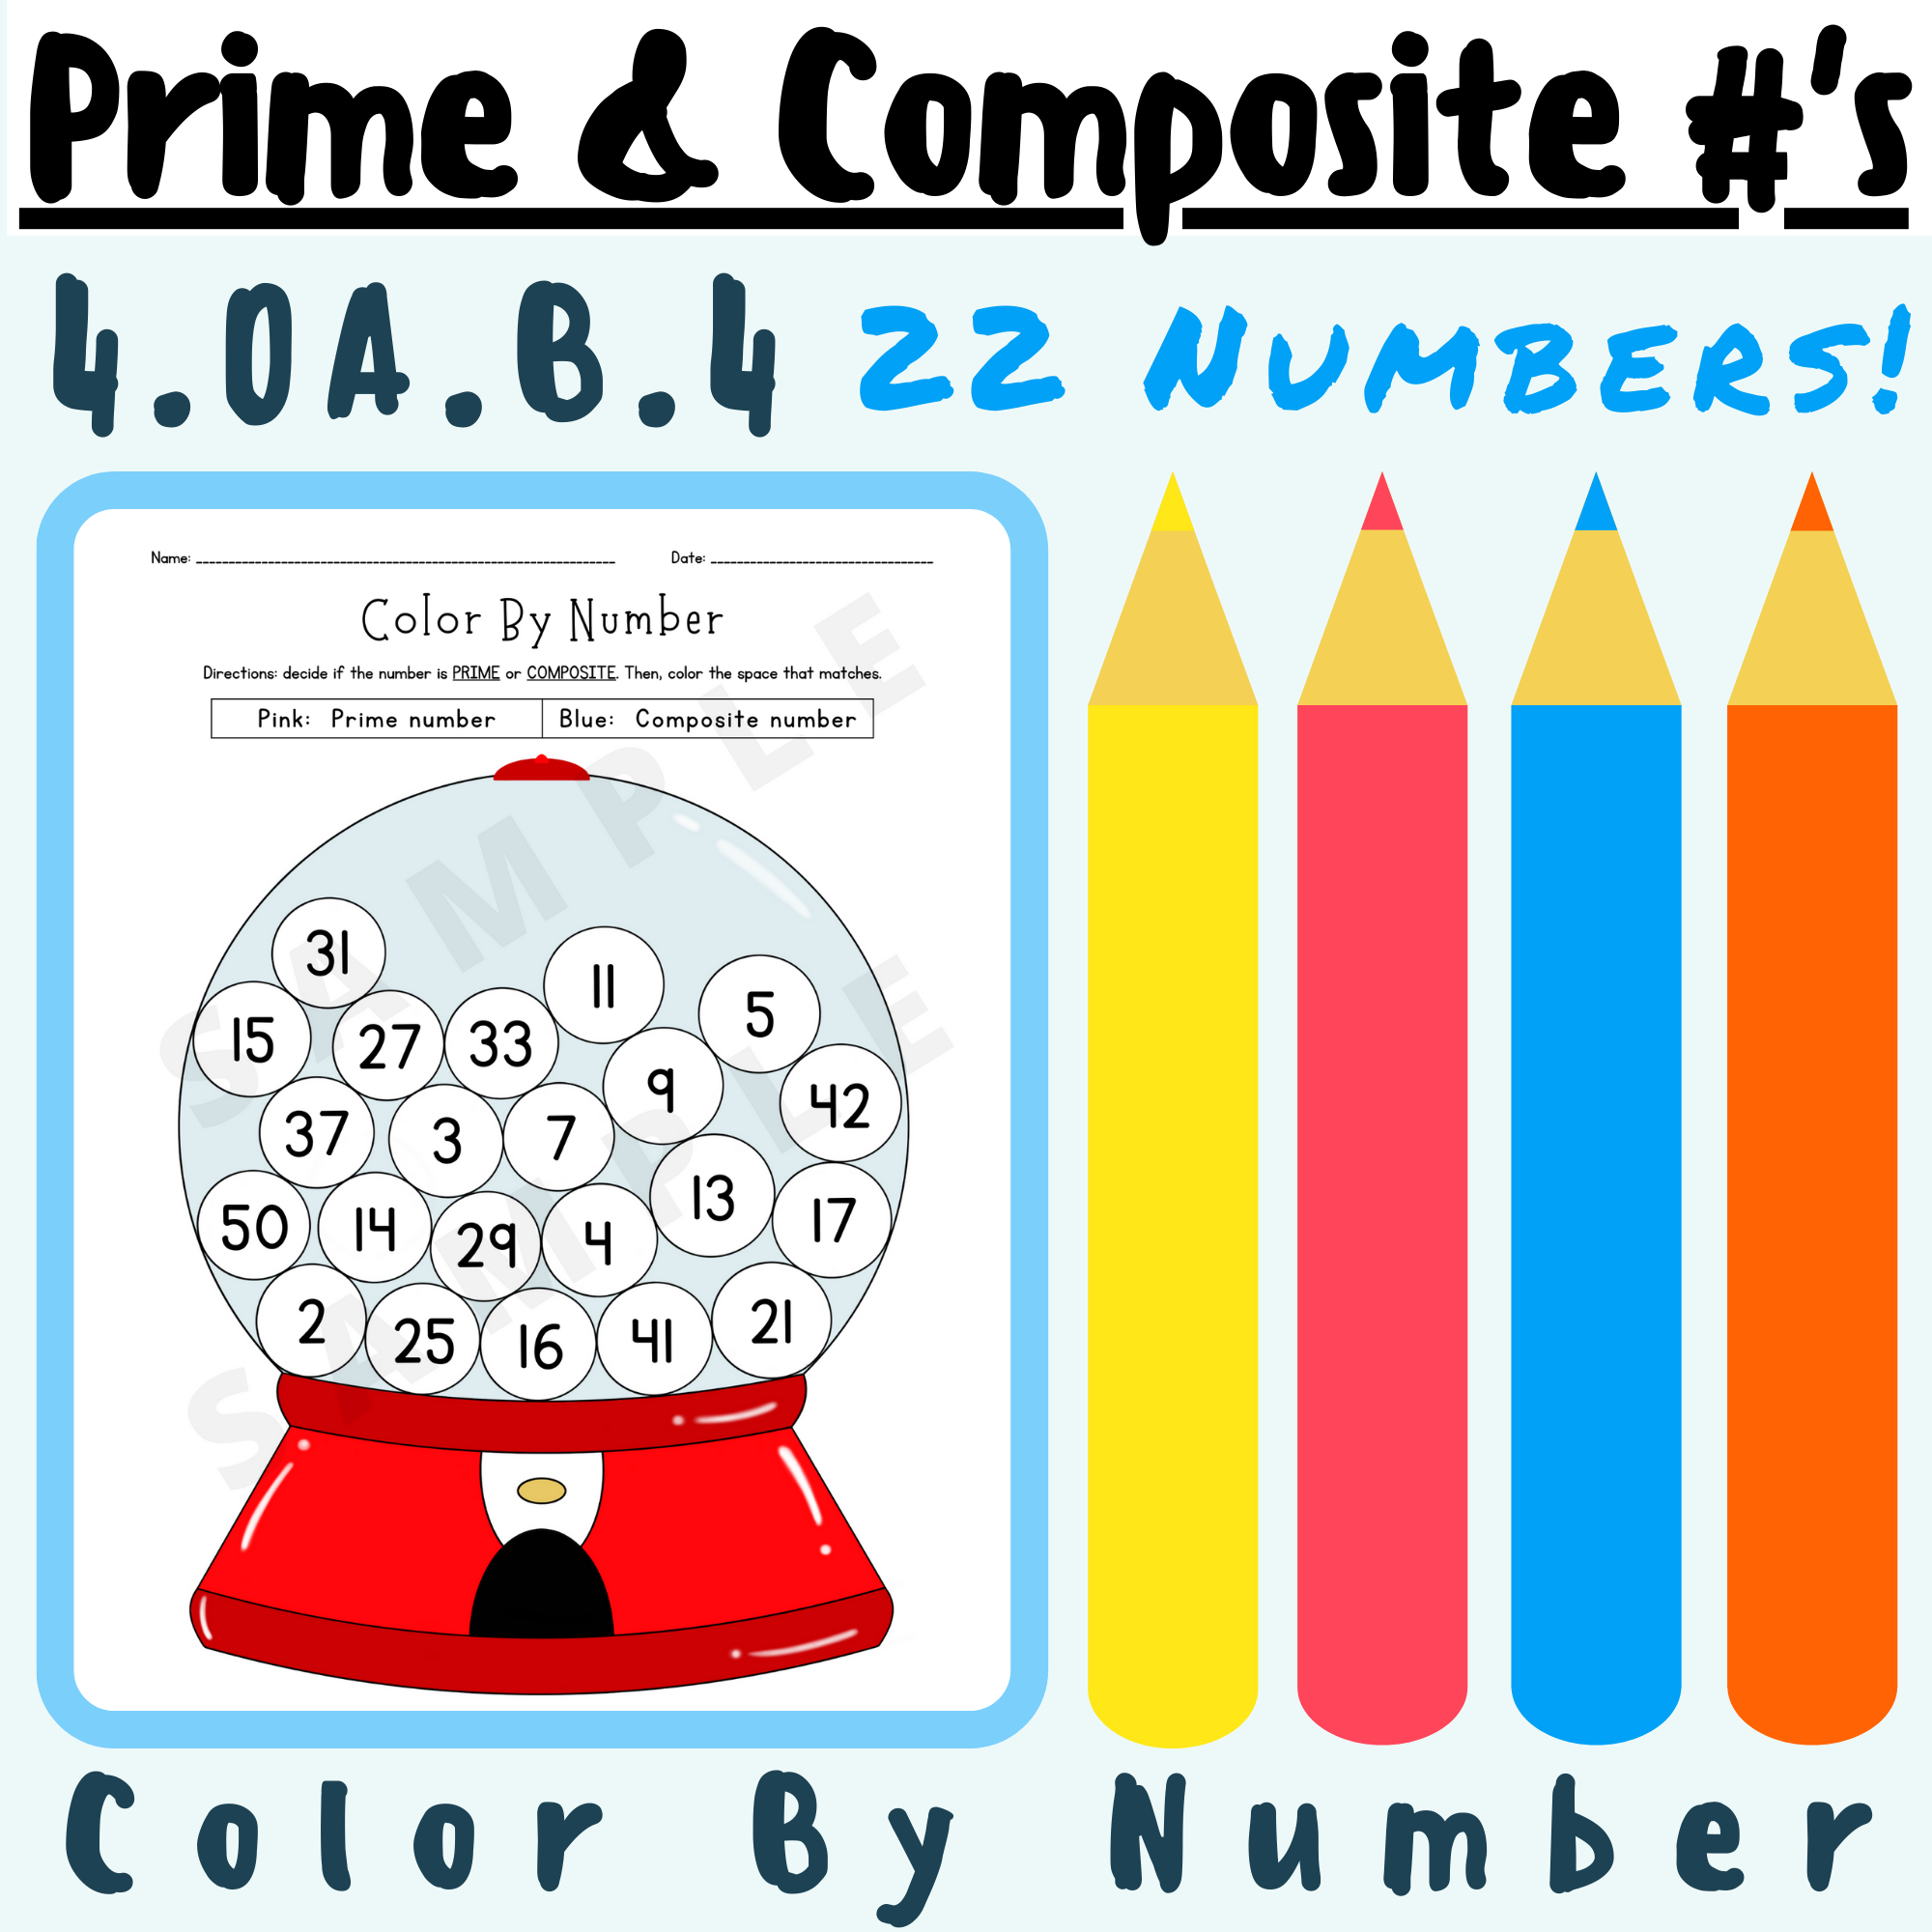 prime-and-composite-numbers-color-by-number-activity-worksheet-4-oa-4